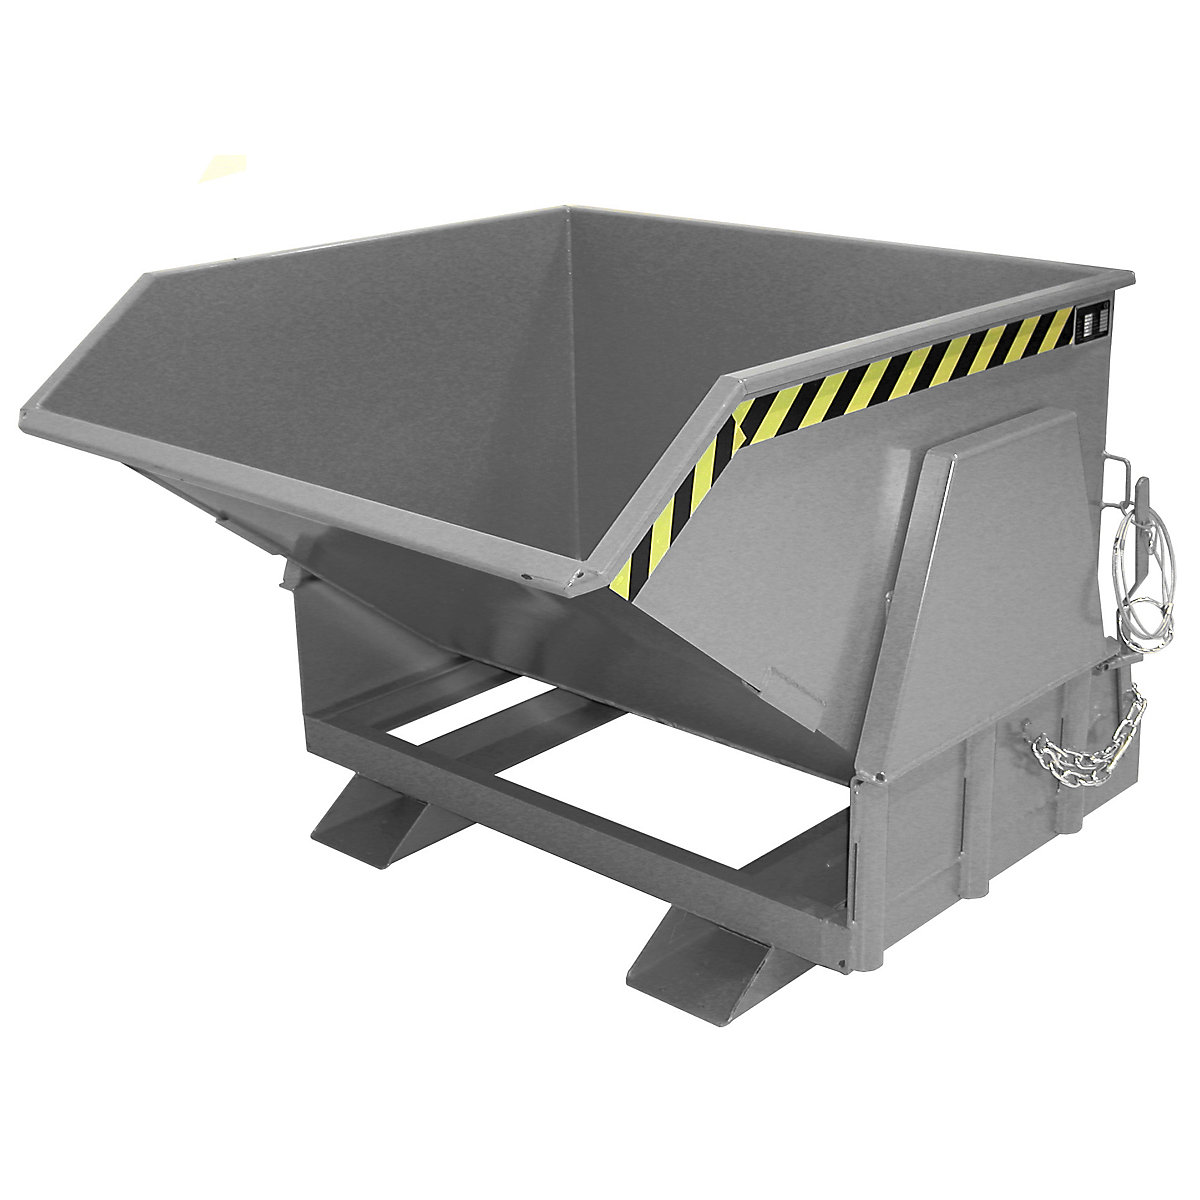 Tilting skip, standard overall height, without wheels – eurokraft pro, capacity 1.0 m³, painted grey RAL 7005-6